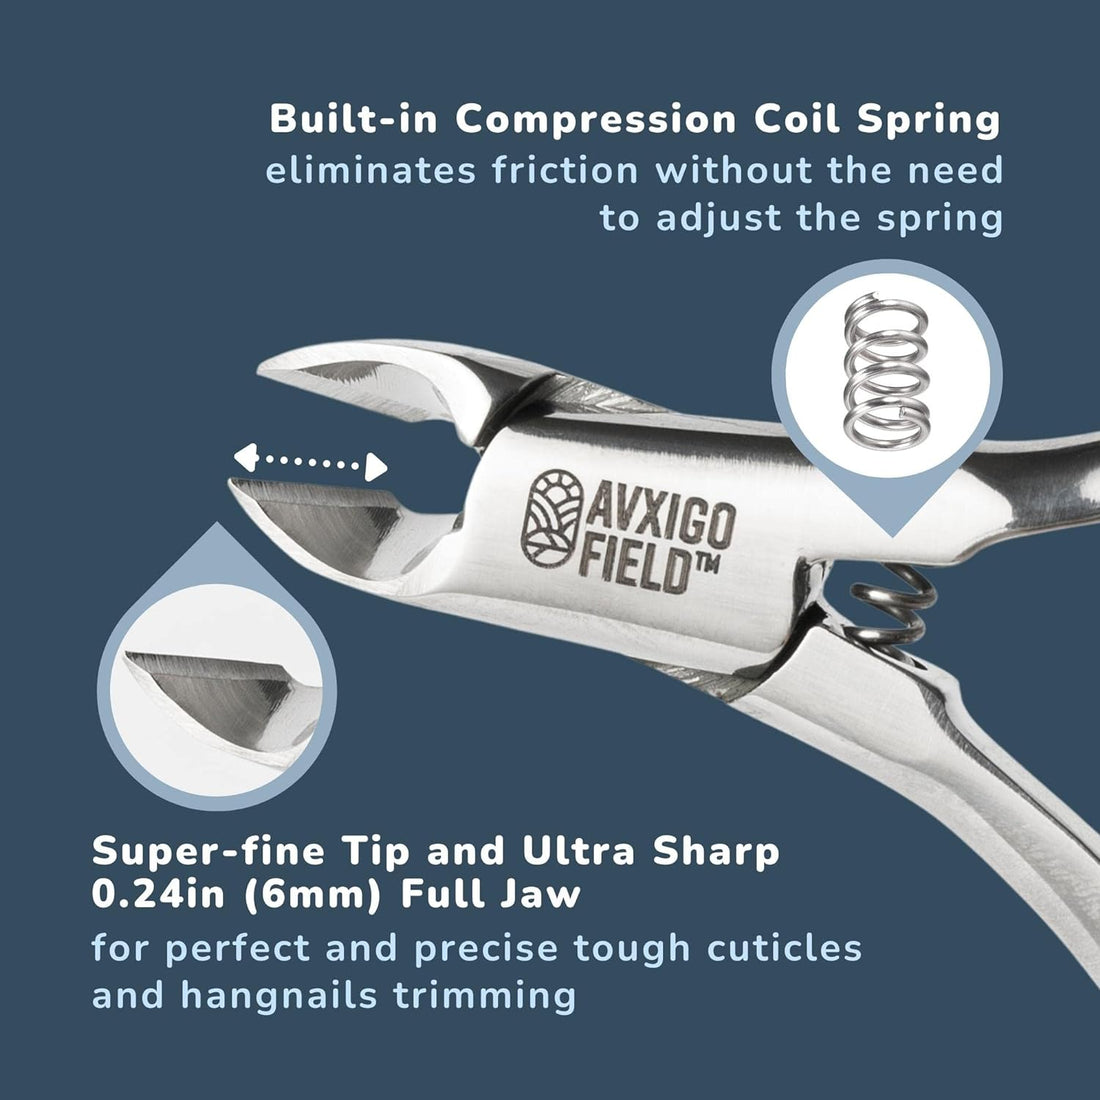 AVXIGO FIELD Professional Cuticle Nipper - Built-in Compression Coil Spring with Full Jaw Surgical Grade Silver Stainless Steel Cuticle Trimmer